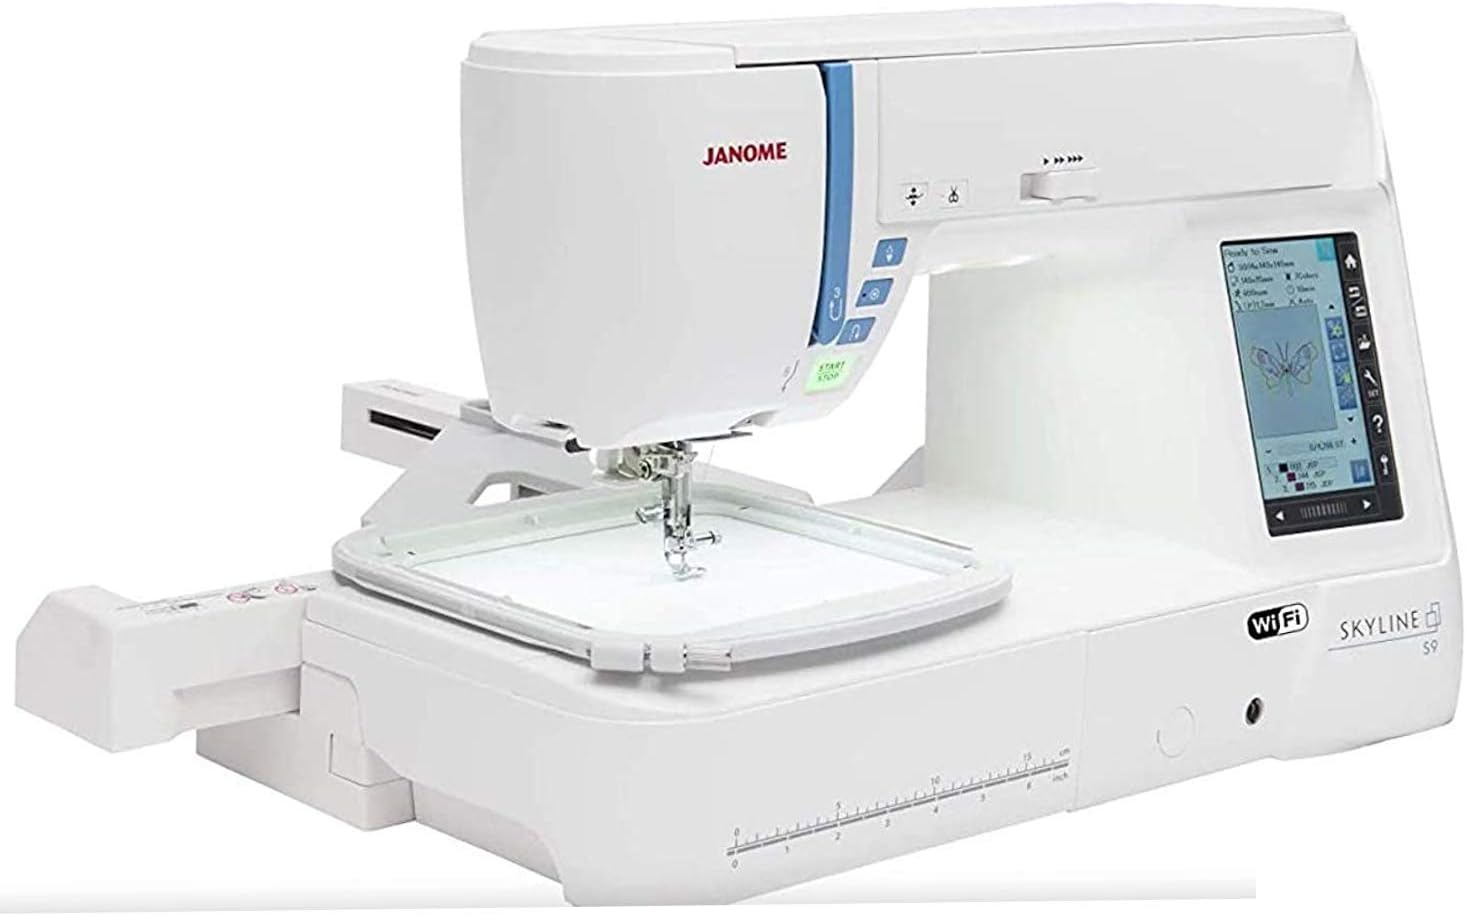 Janome Skyline S9 Embroidery Machine, Sewing & Quilting Machine